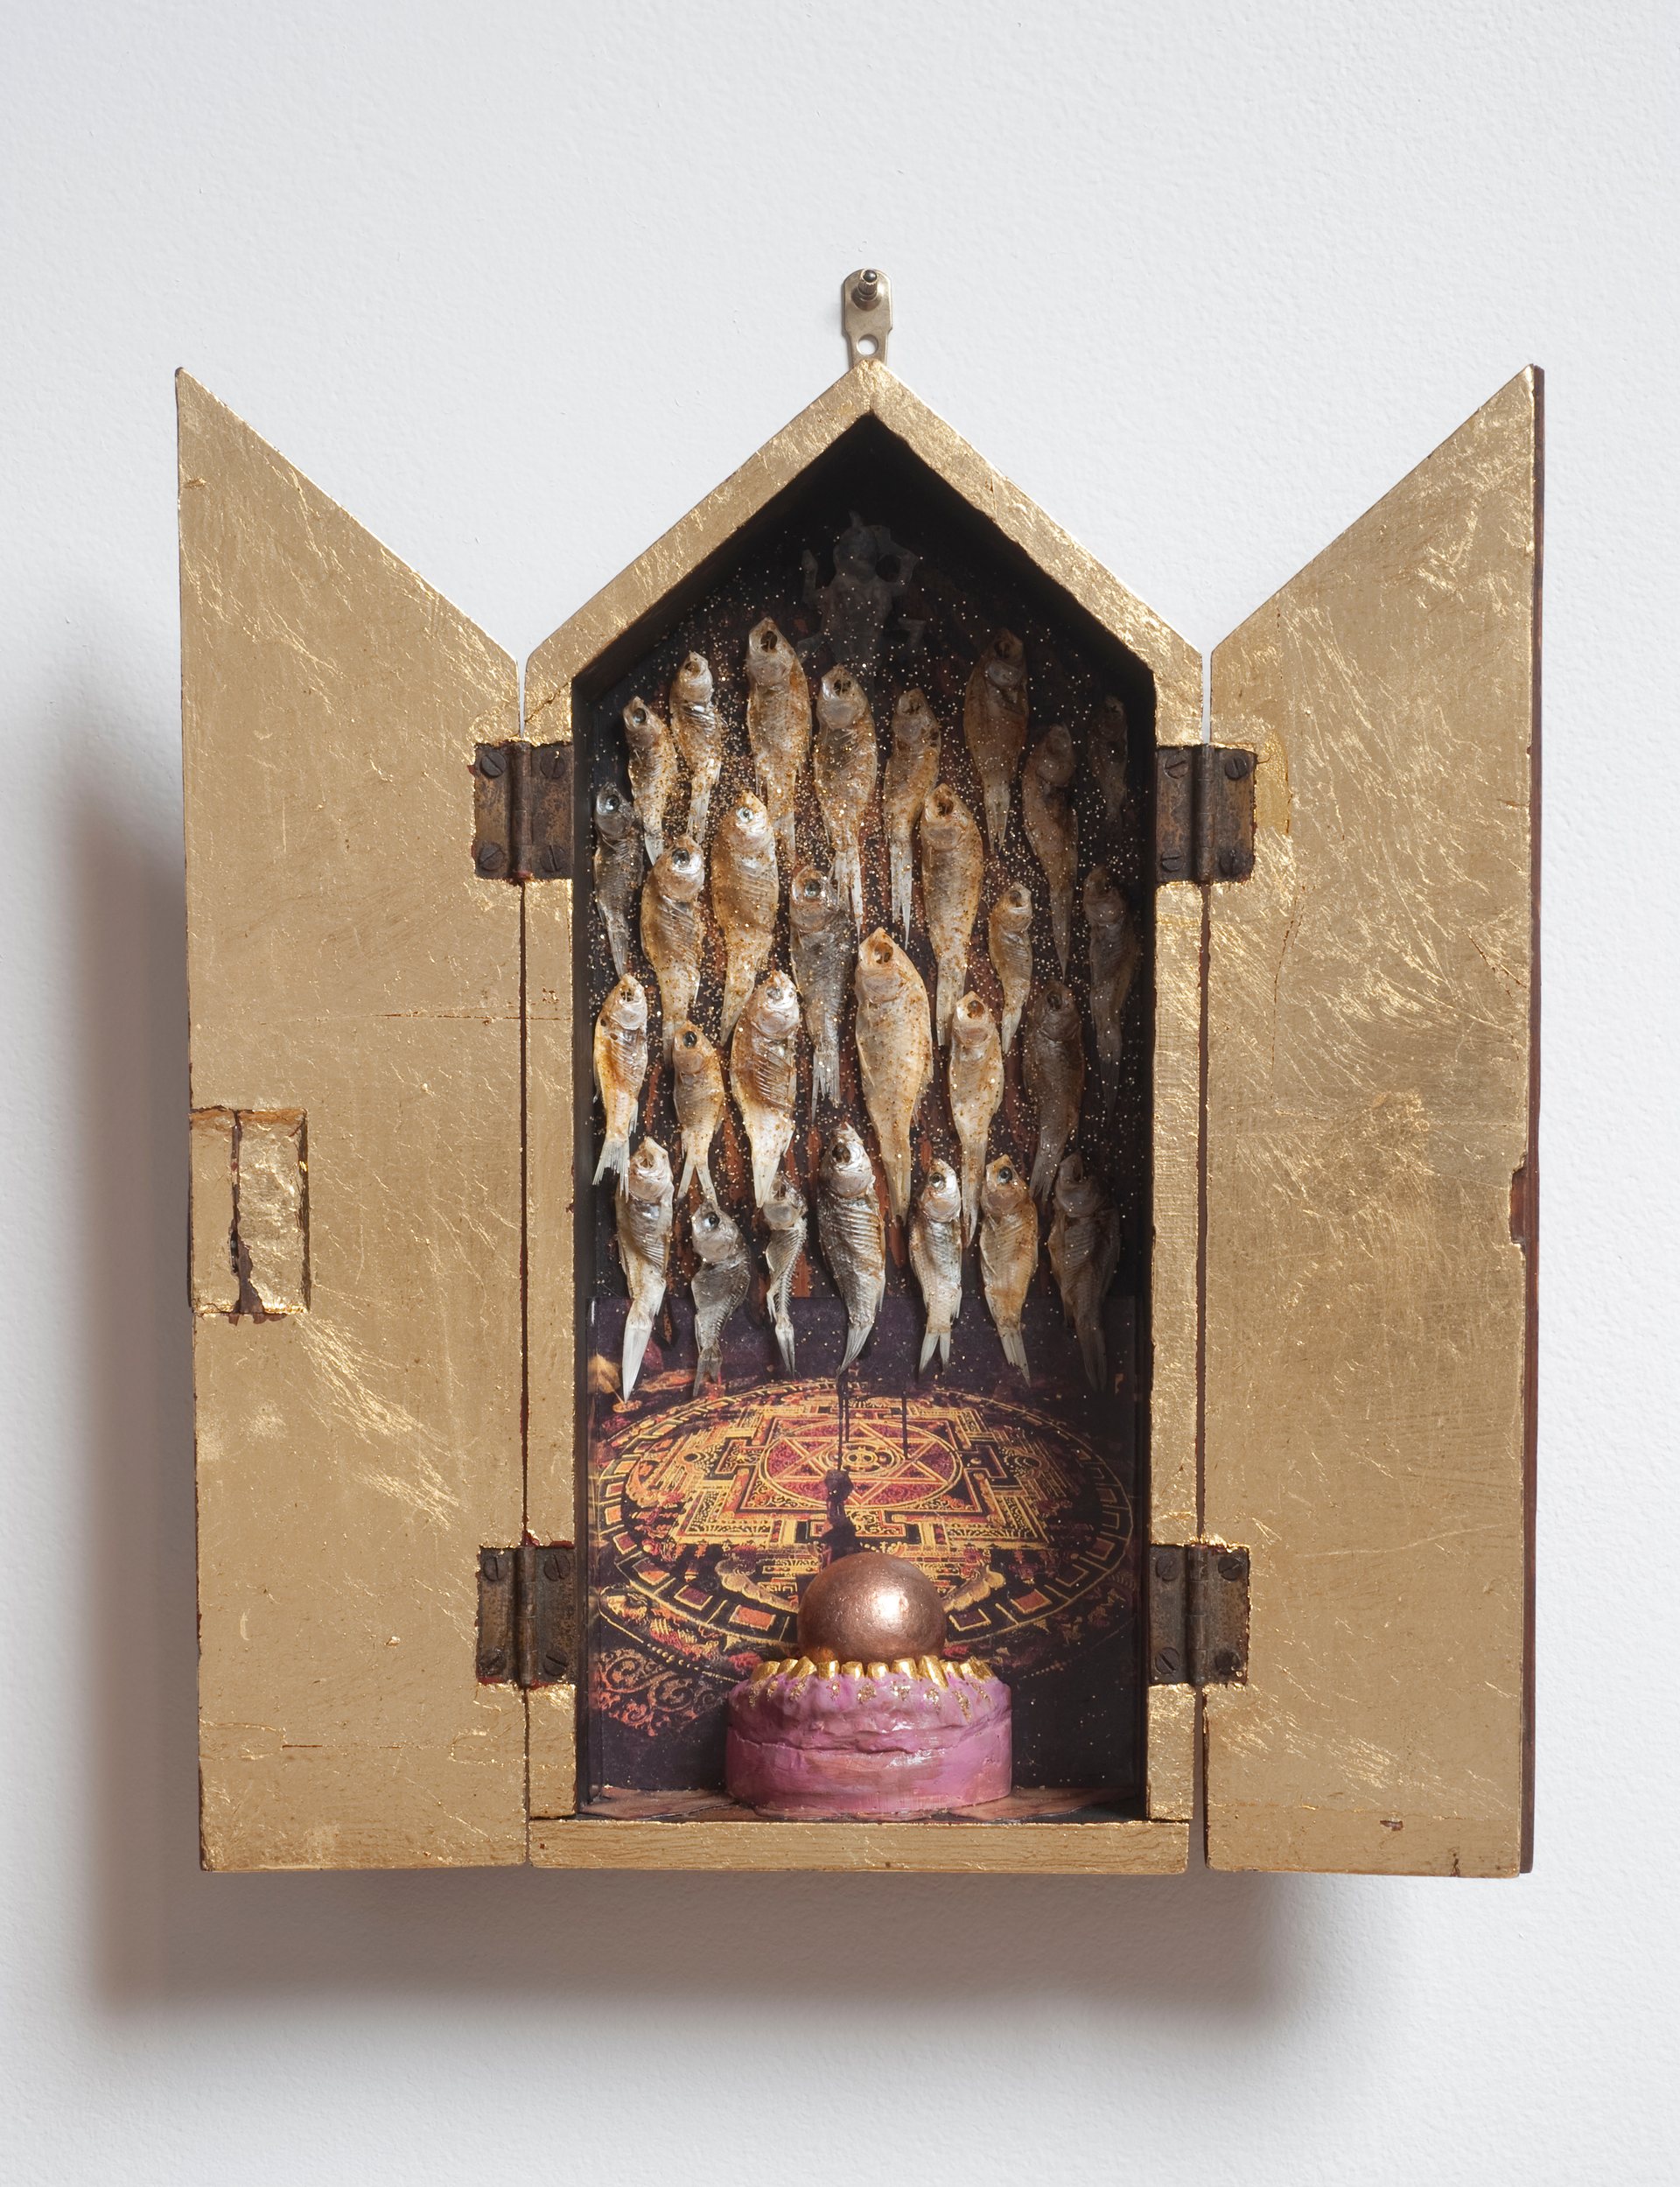 GENESIS BREYER P-ORRIDGE 'Feeding the Fishes': a small sculptural shrine. Photo Invisible Exports